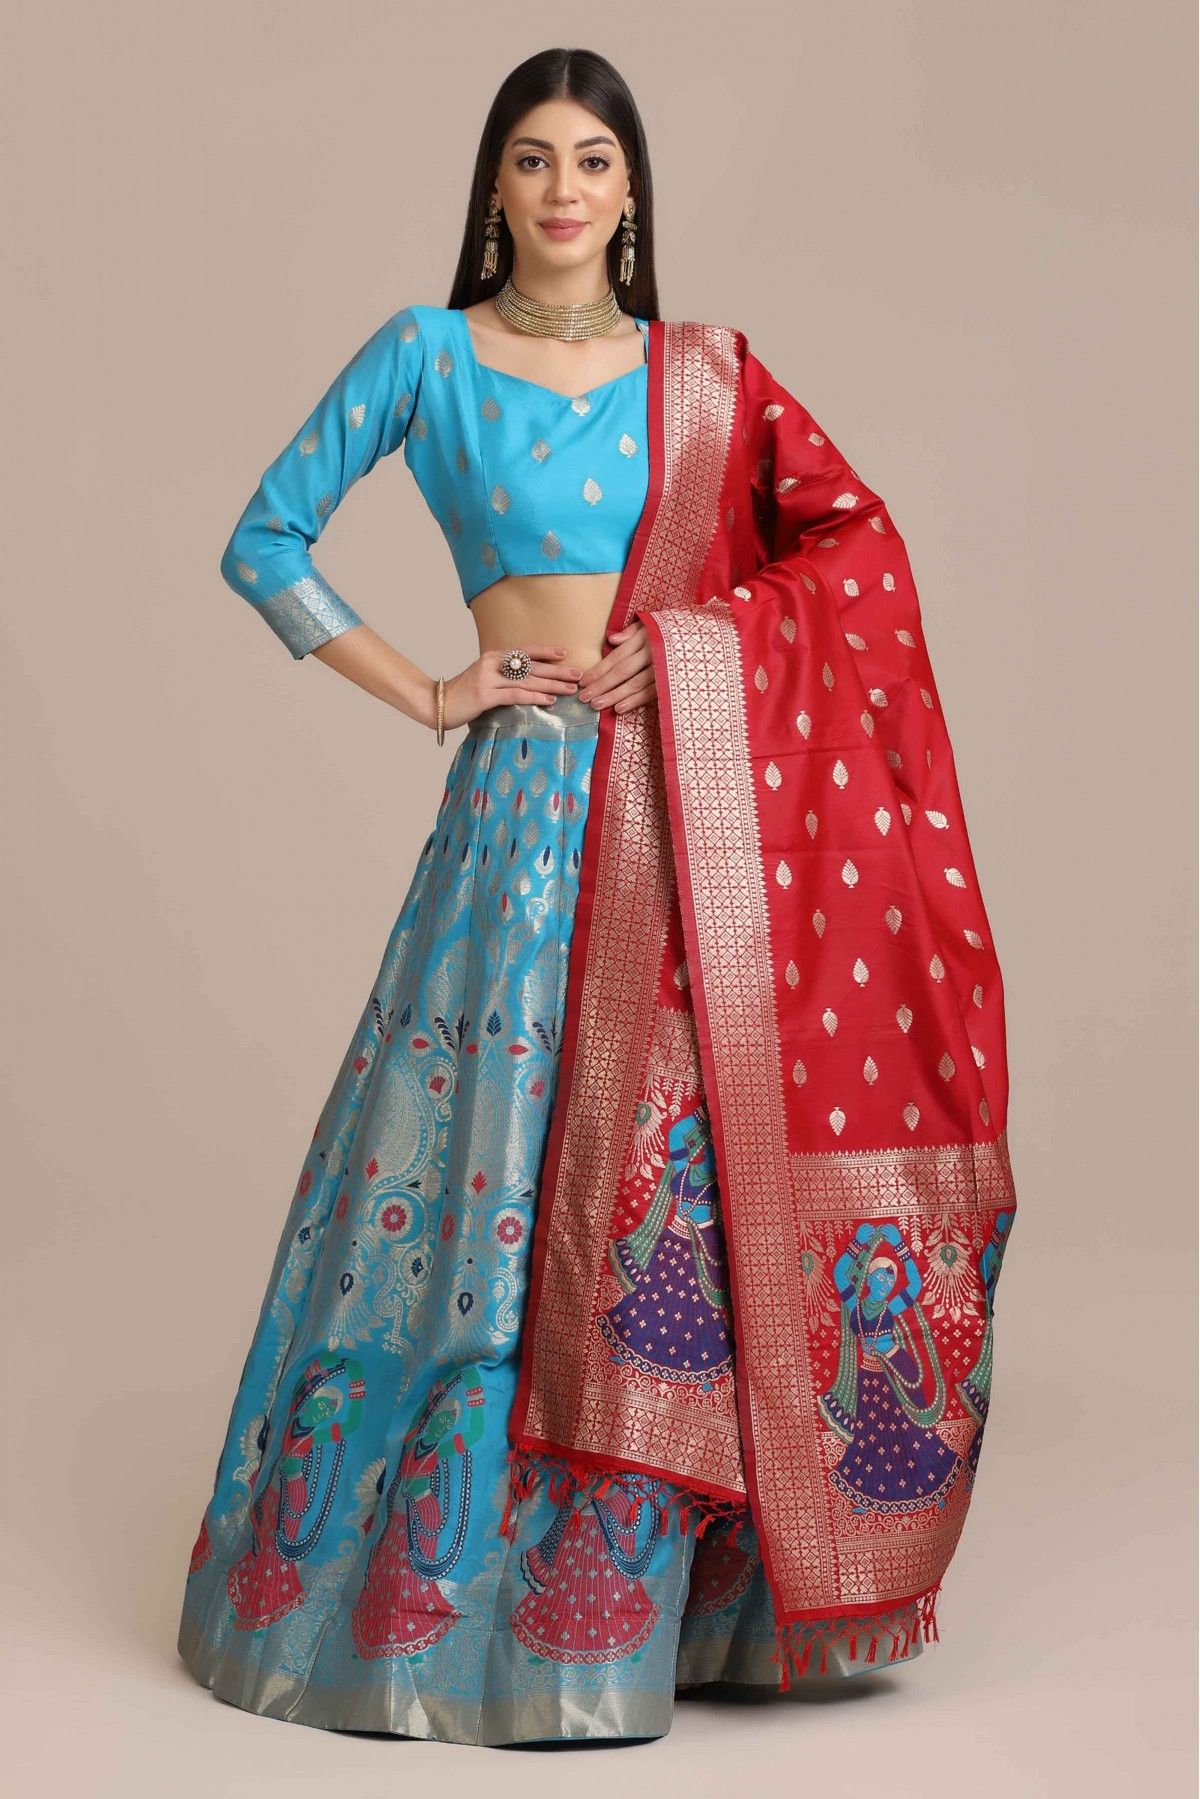 SKy Blue and Red color lehenga choli with Sequins ,Thread ,Embroidery